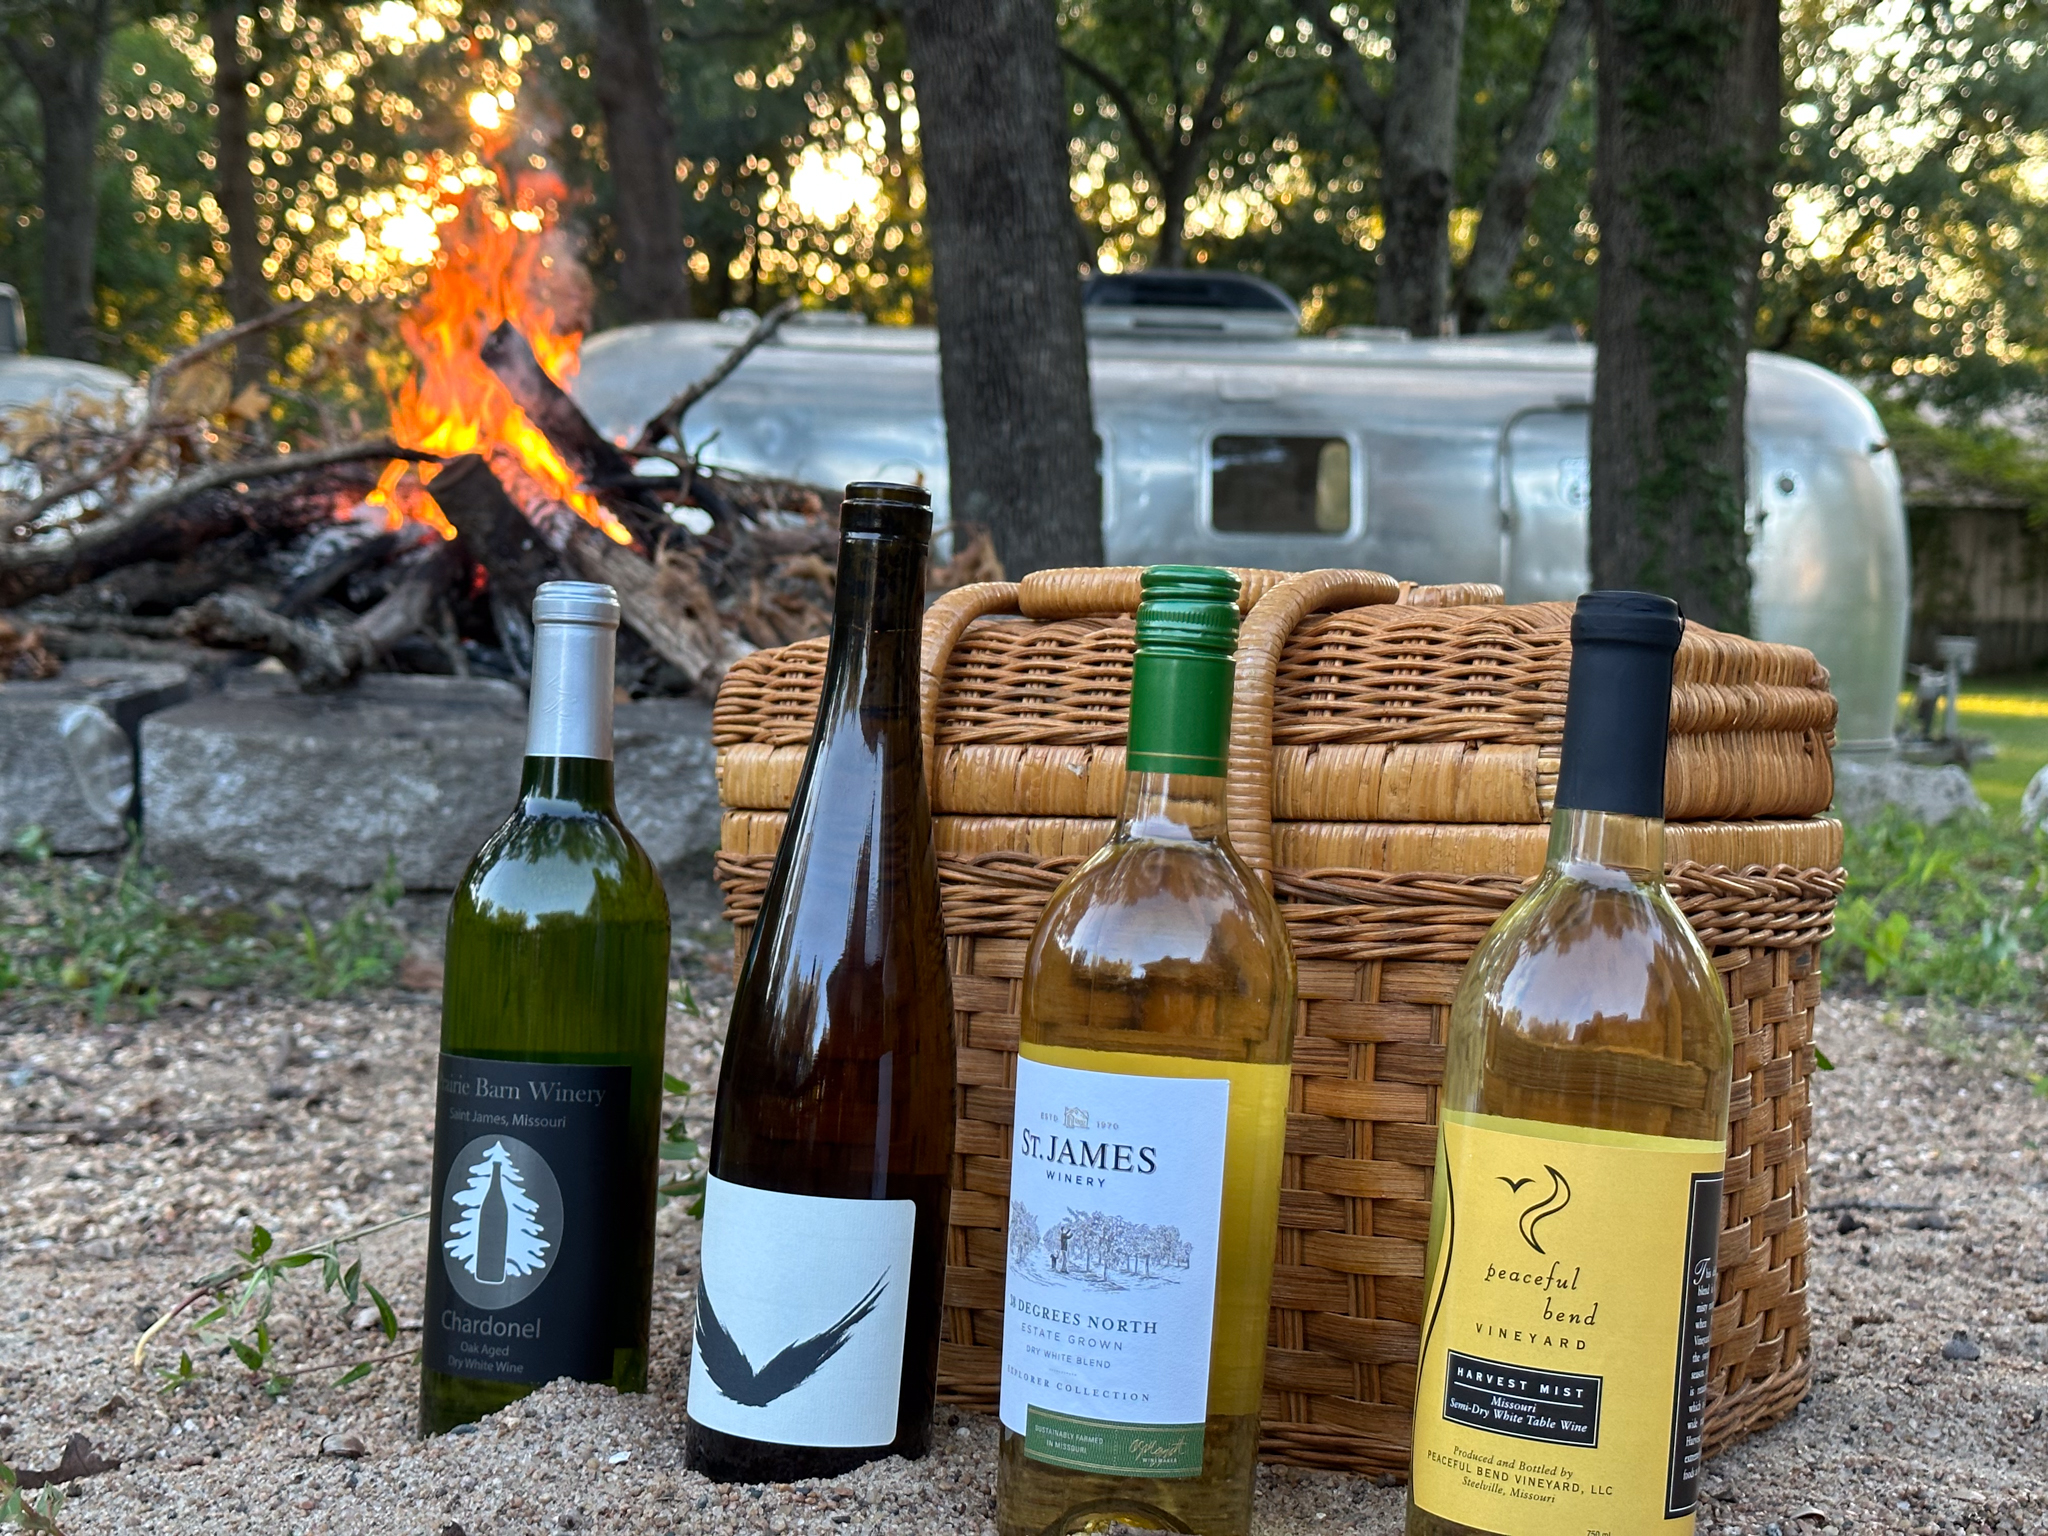 Wine bottles near a fire and campground